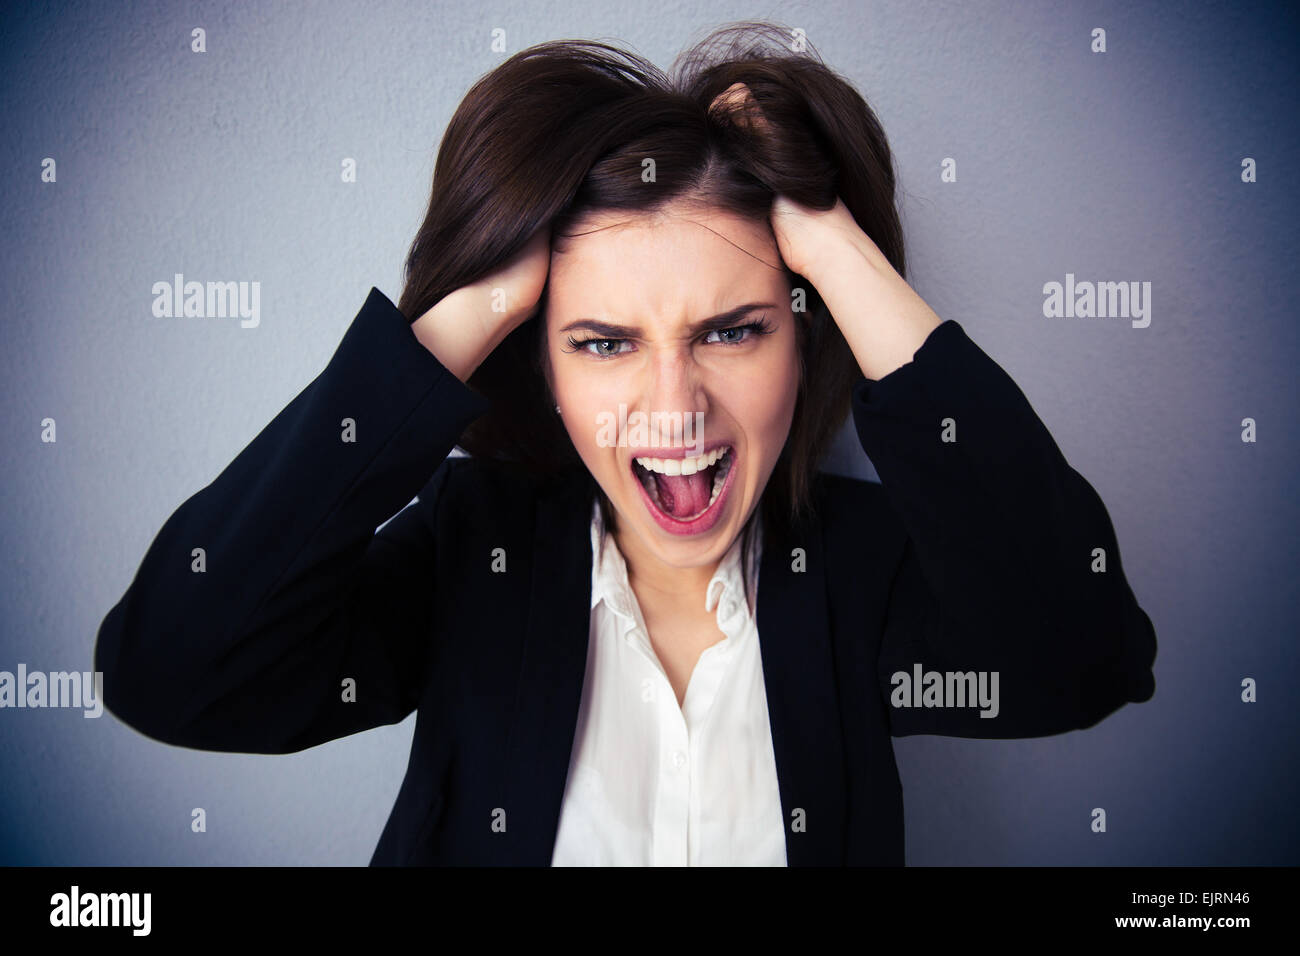 Angry businesswoman shouting over gray background. Holding her hair. Looking at camera Stock Photo